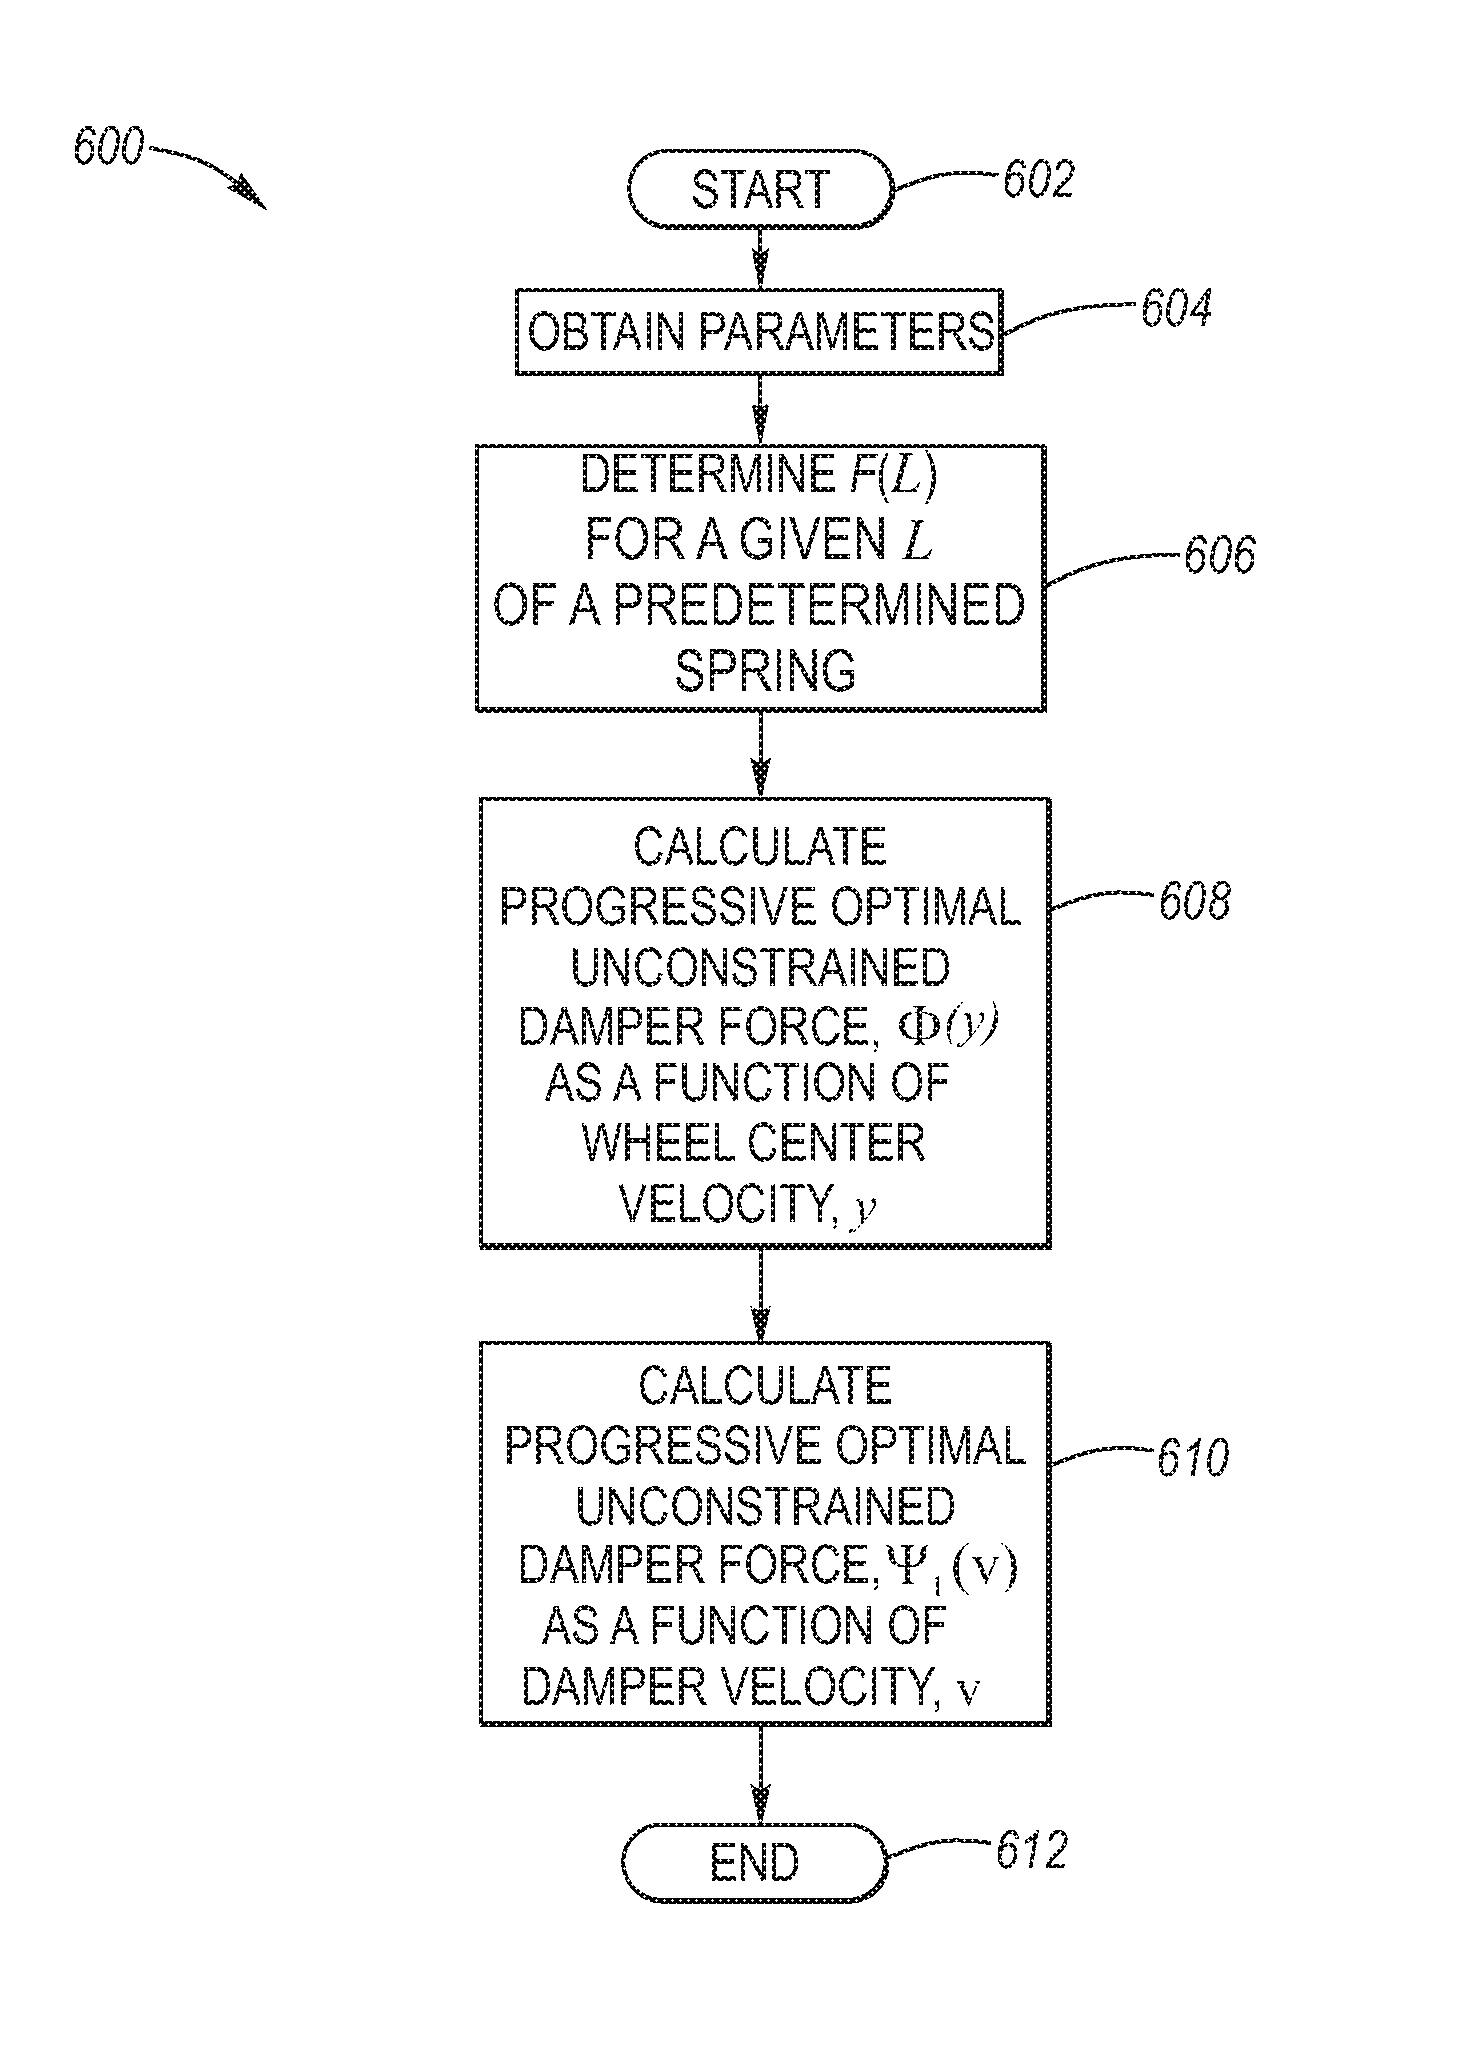 Suspension system with optimized damping response